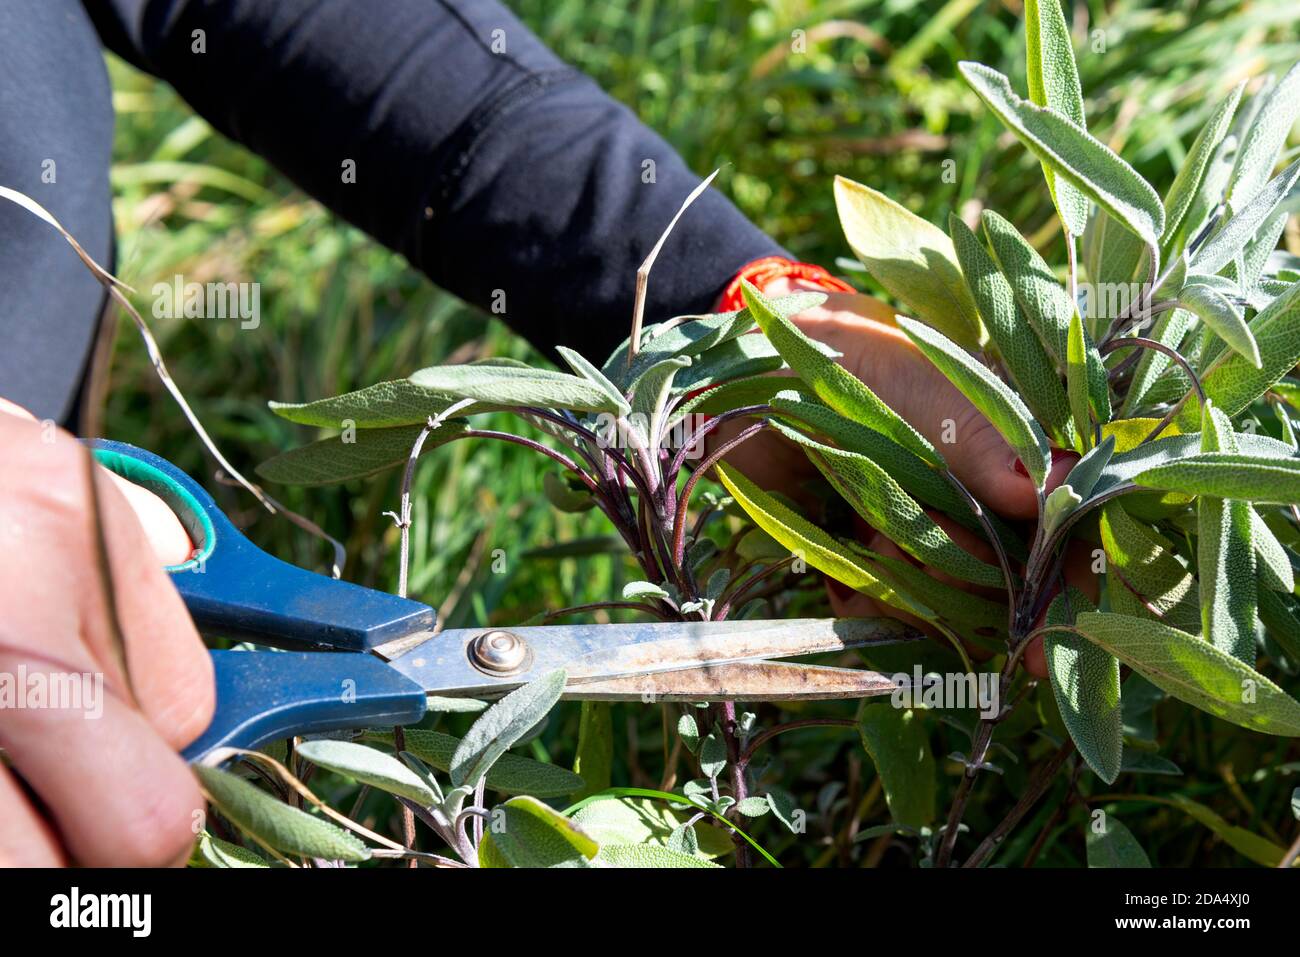 Woman's hands cutting fresh sage or Salvia Officinalis with scissors Stock Photo